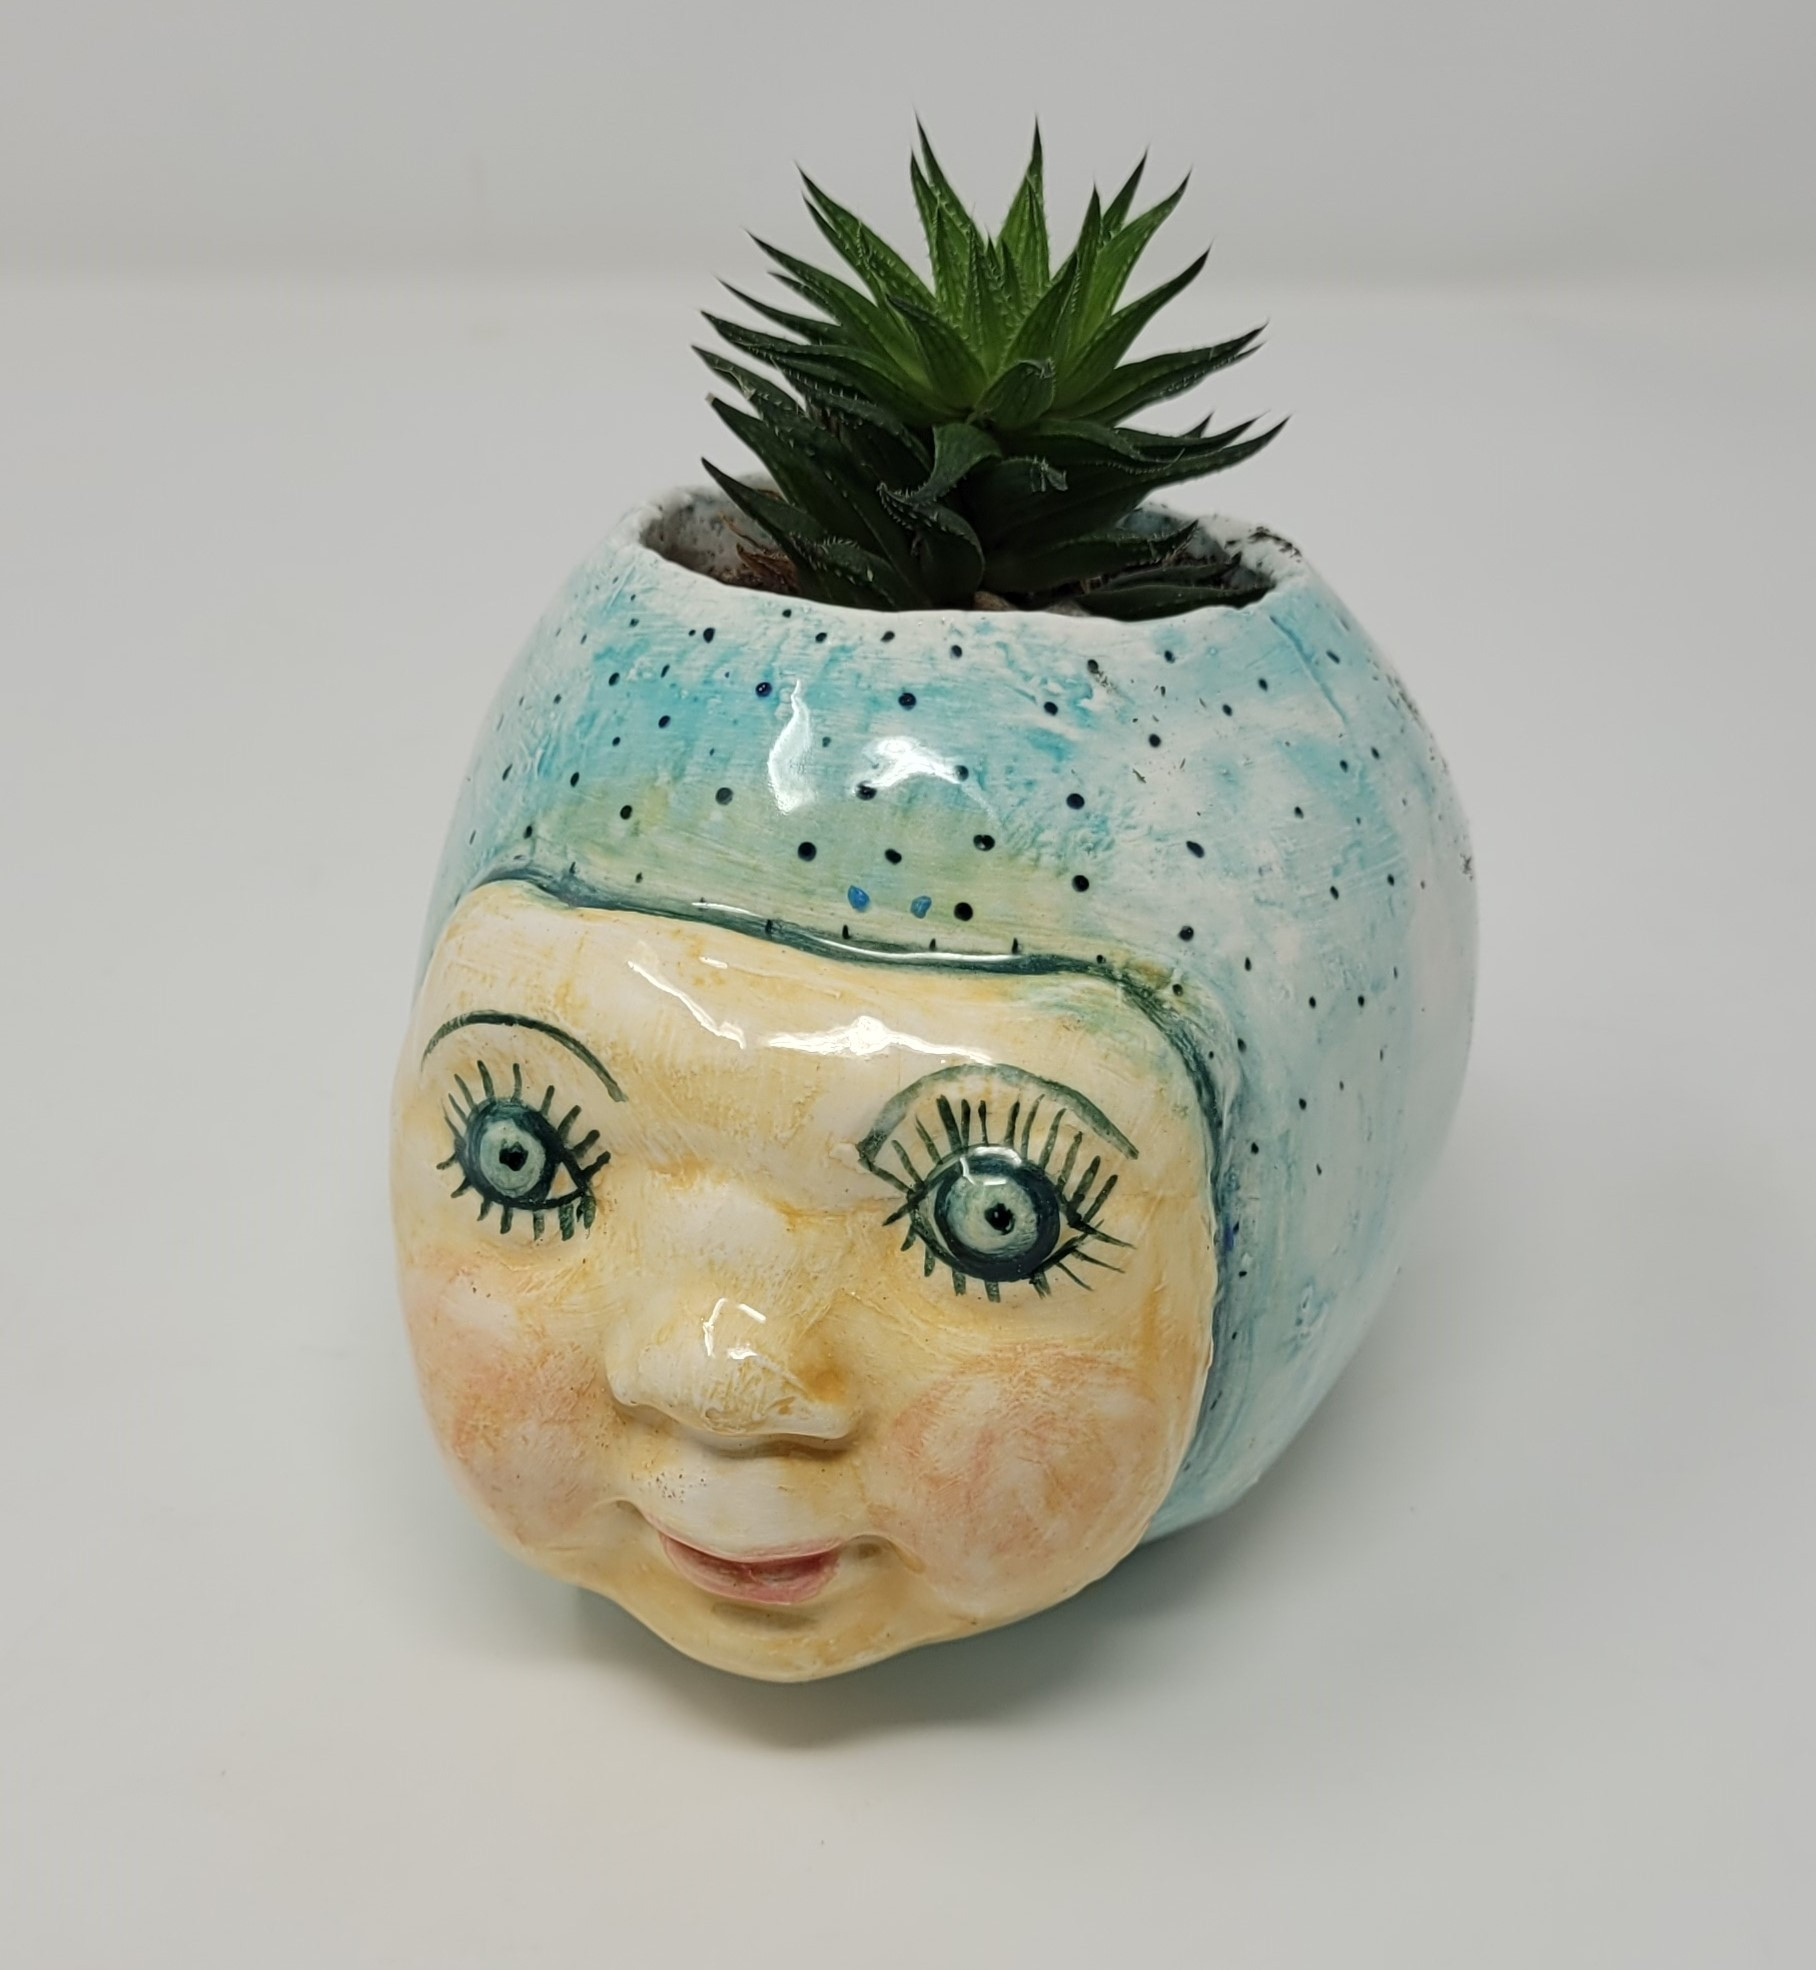 Handmade ceramic planter with live plant by local artist, Dolores Duenez.